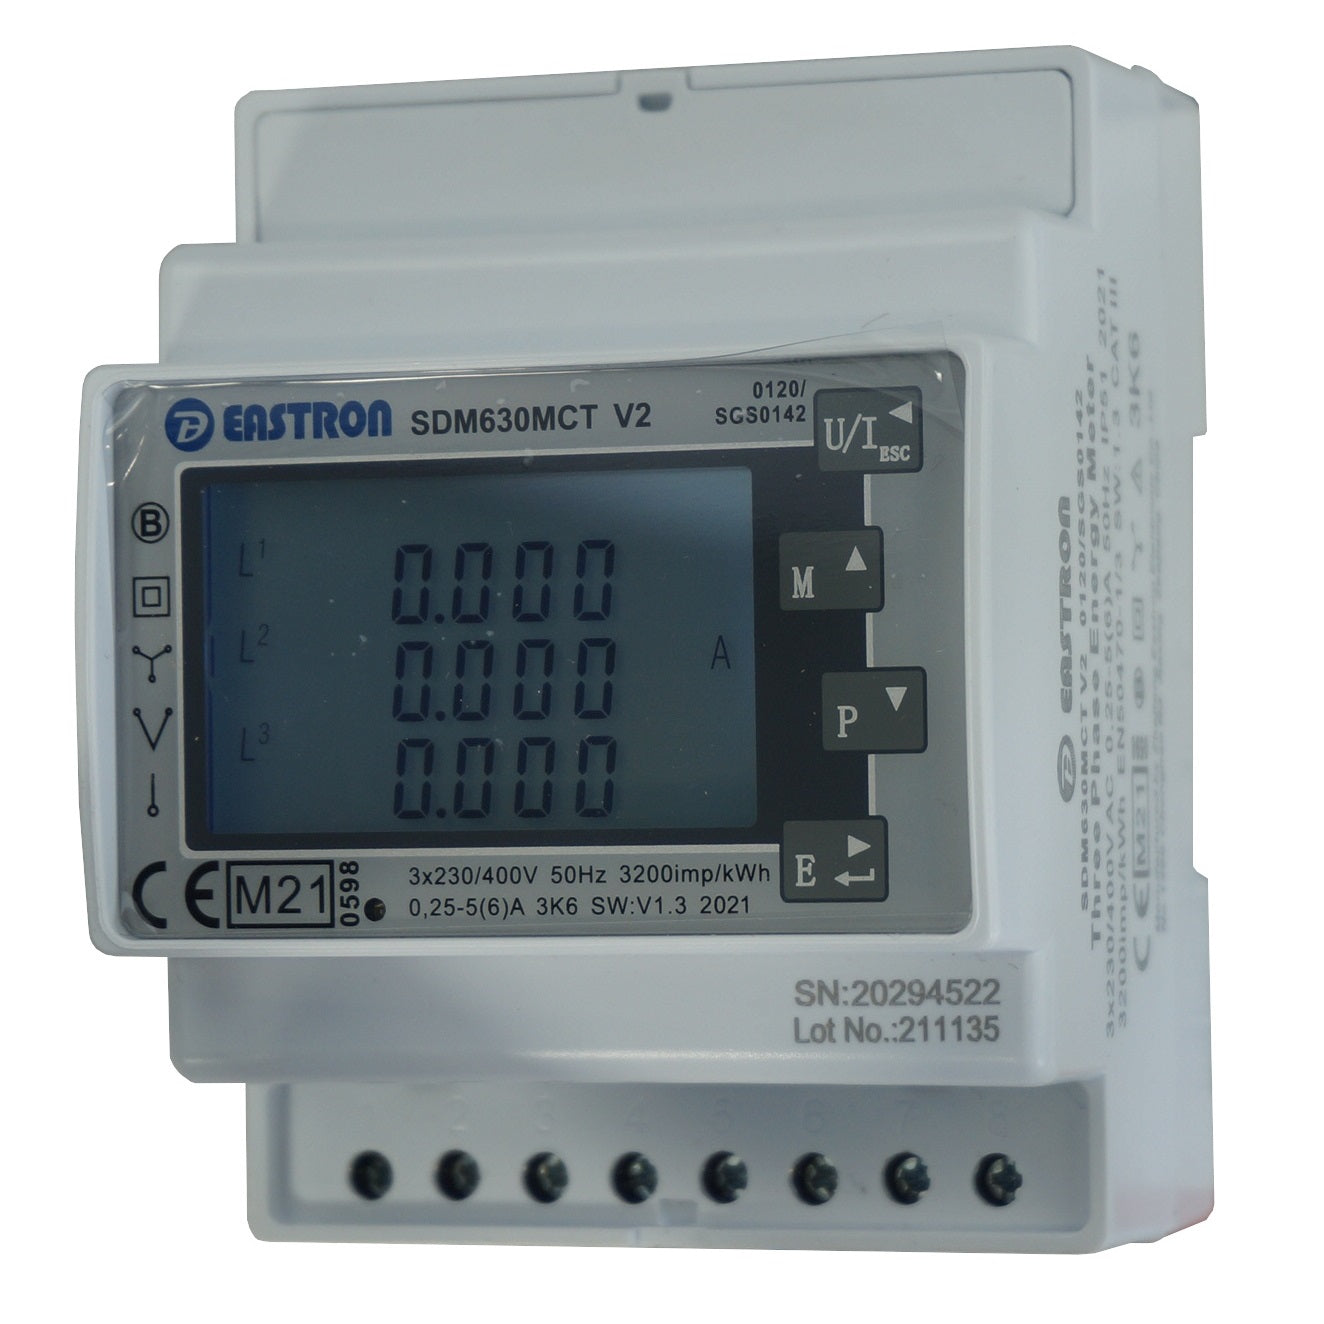 SDM630MCT-MV, DIN Rail Mount kWh Meter, 3 Phase, 240VAC aux, Class 1, 0.333V CT Connect, w/ 2 x pulse outputs and RS485 Modbus RTU Comms, SAA Approved